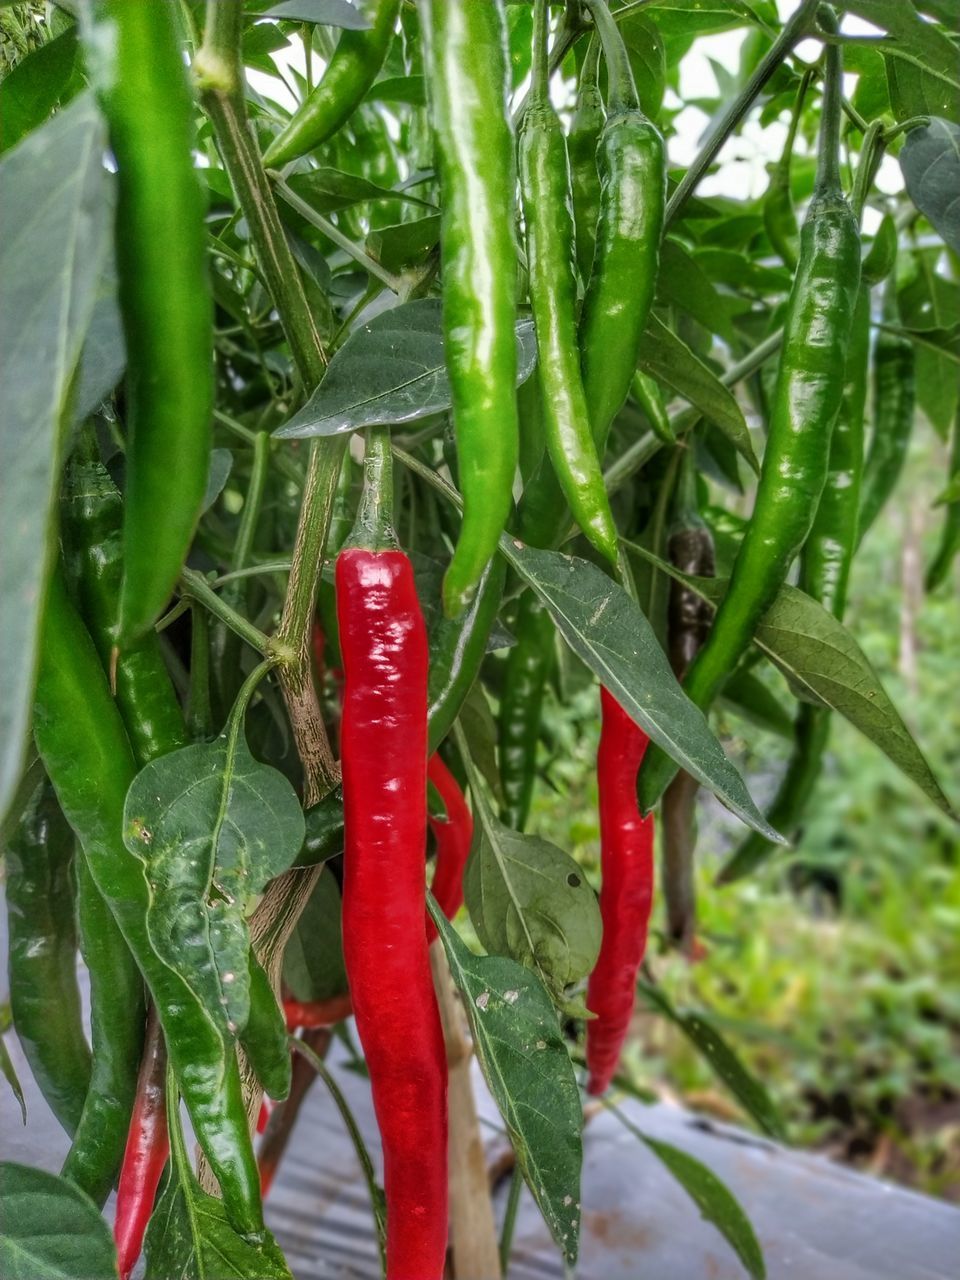 CLOSE-UP OF RED CHILI PEPPER PLANT